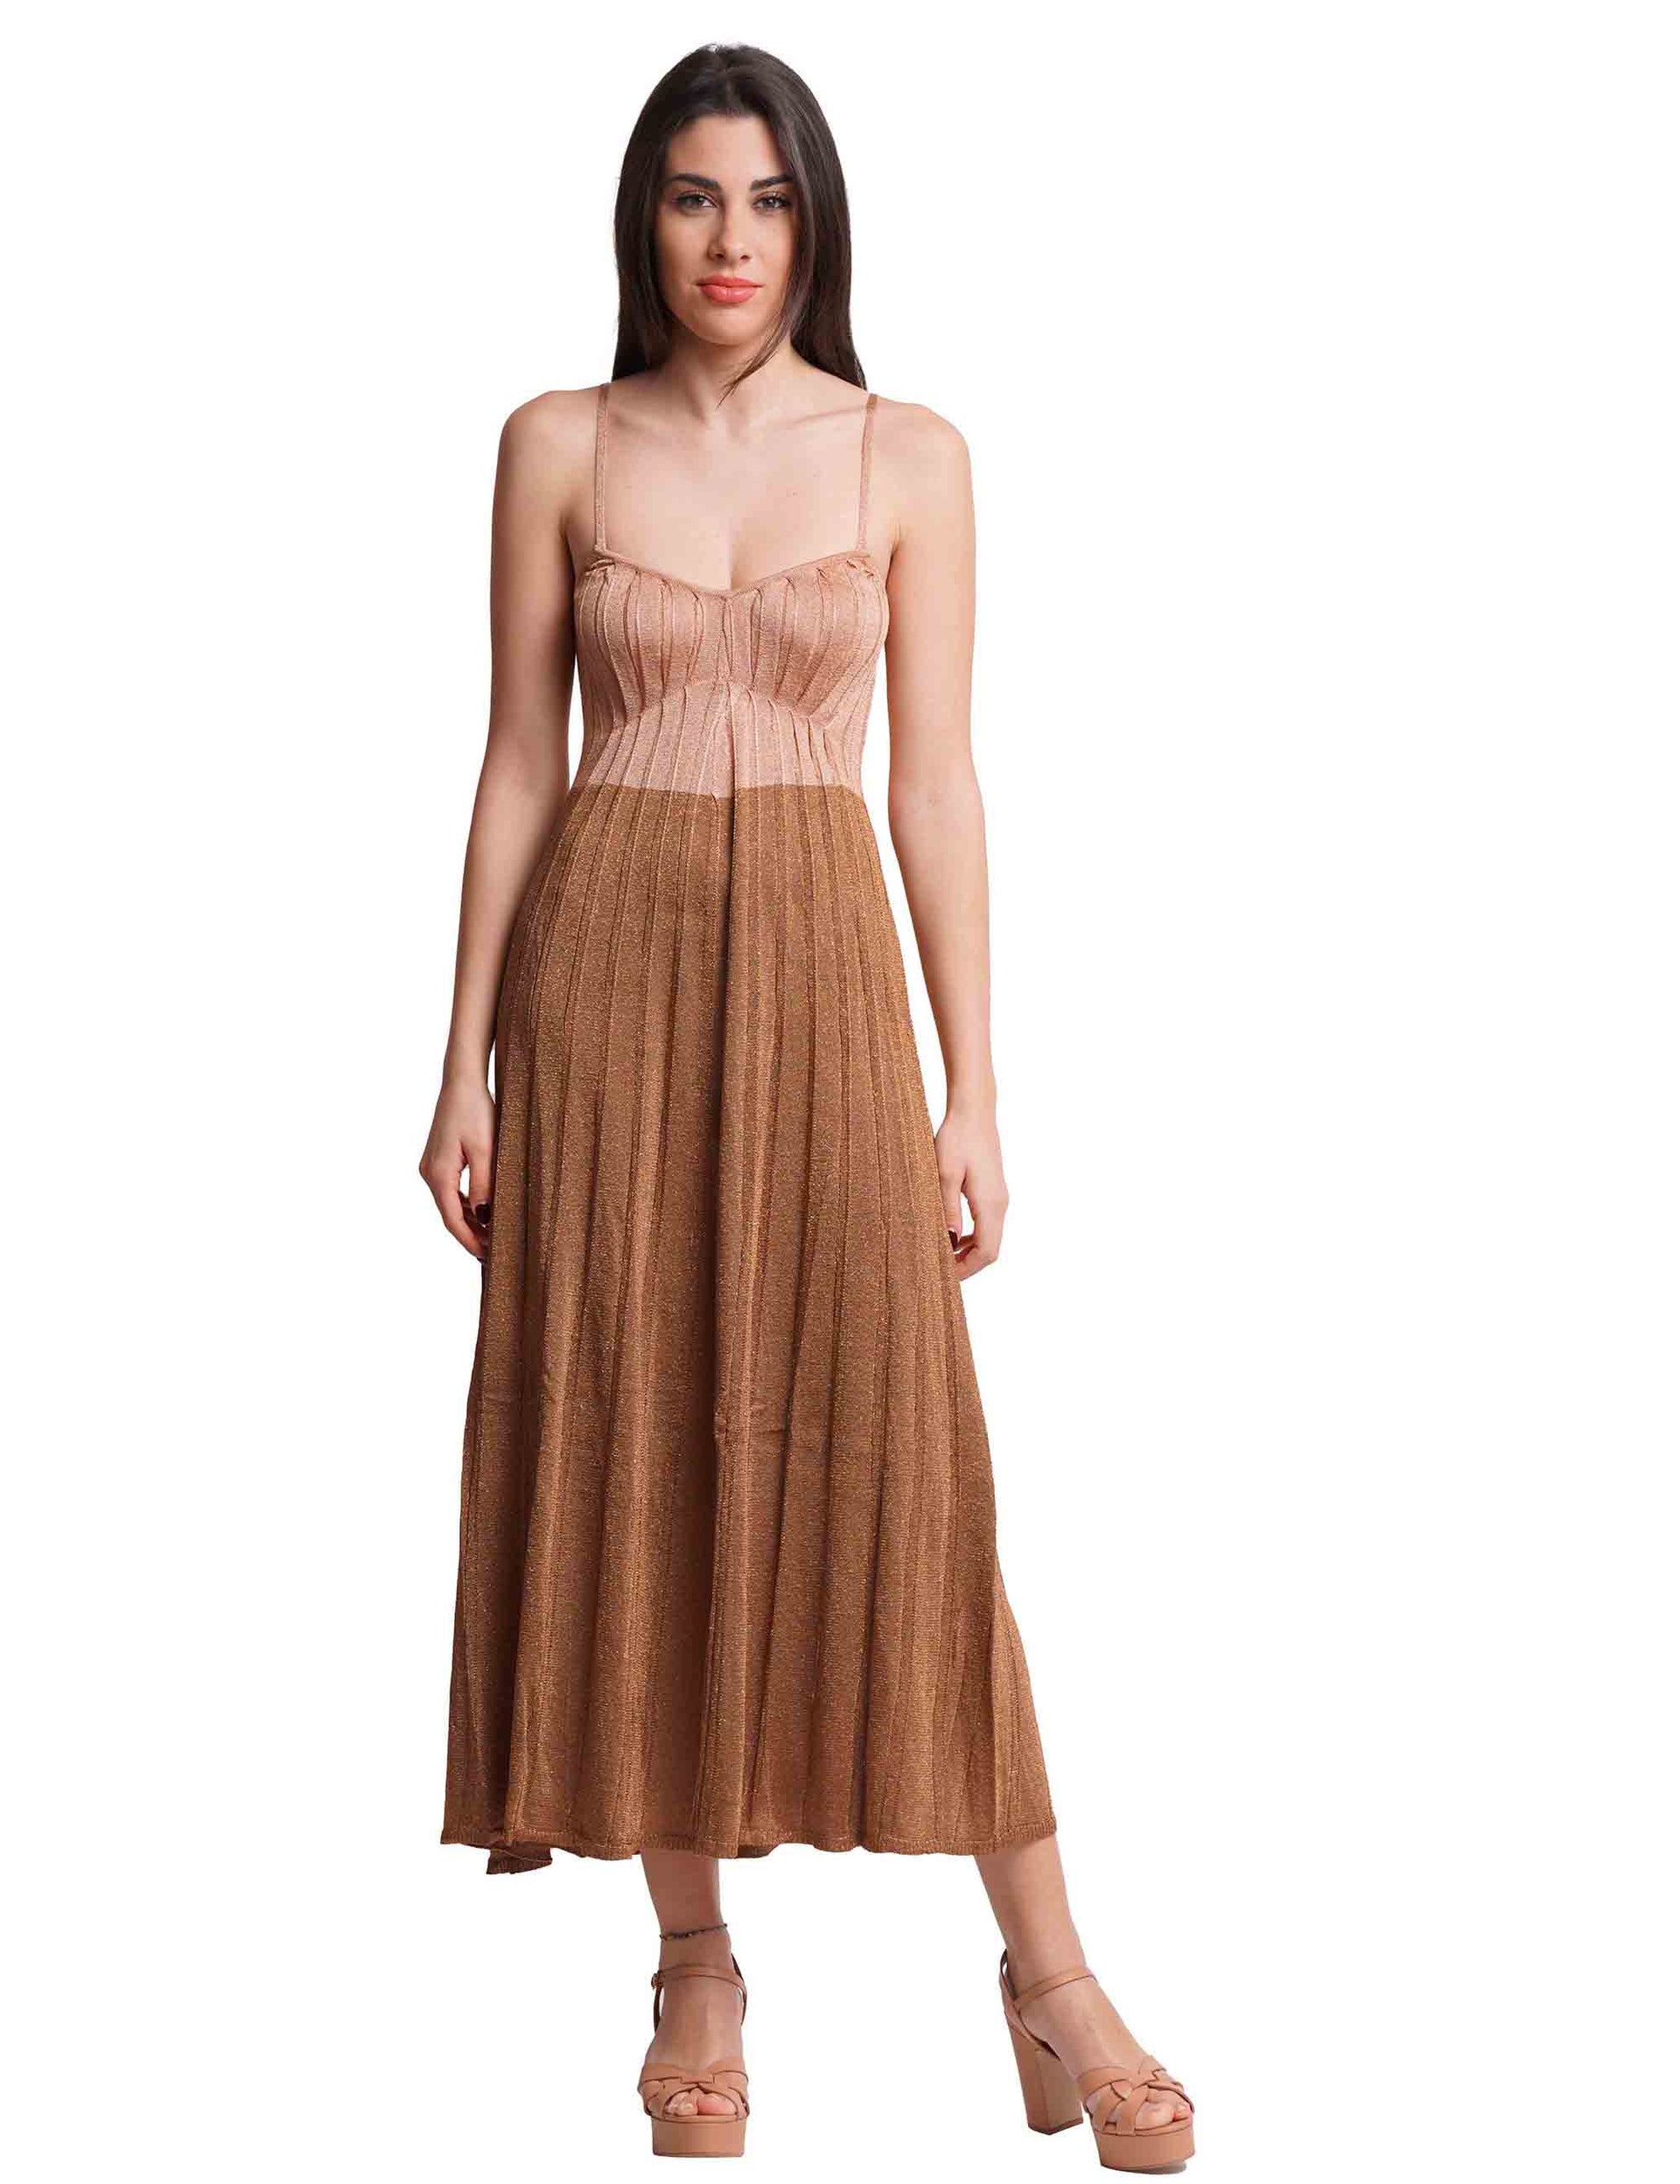 Lurex Touch women's dresses in natural brown viscose with straps